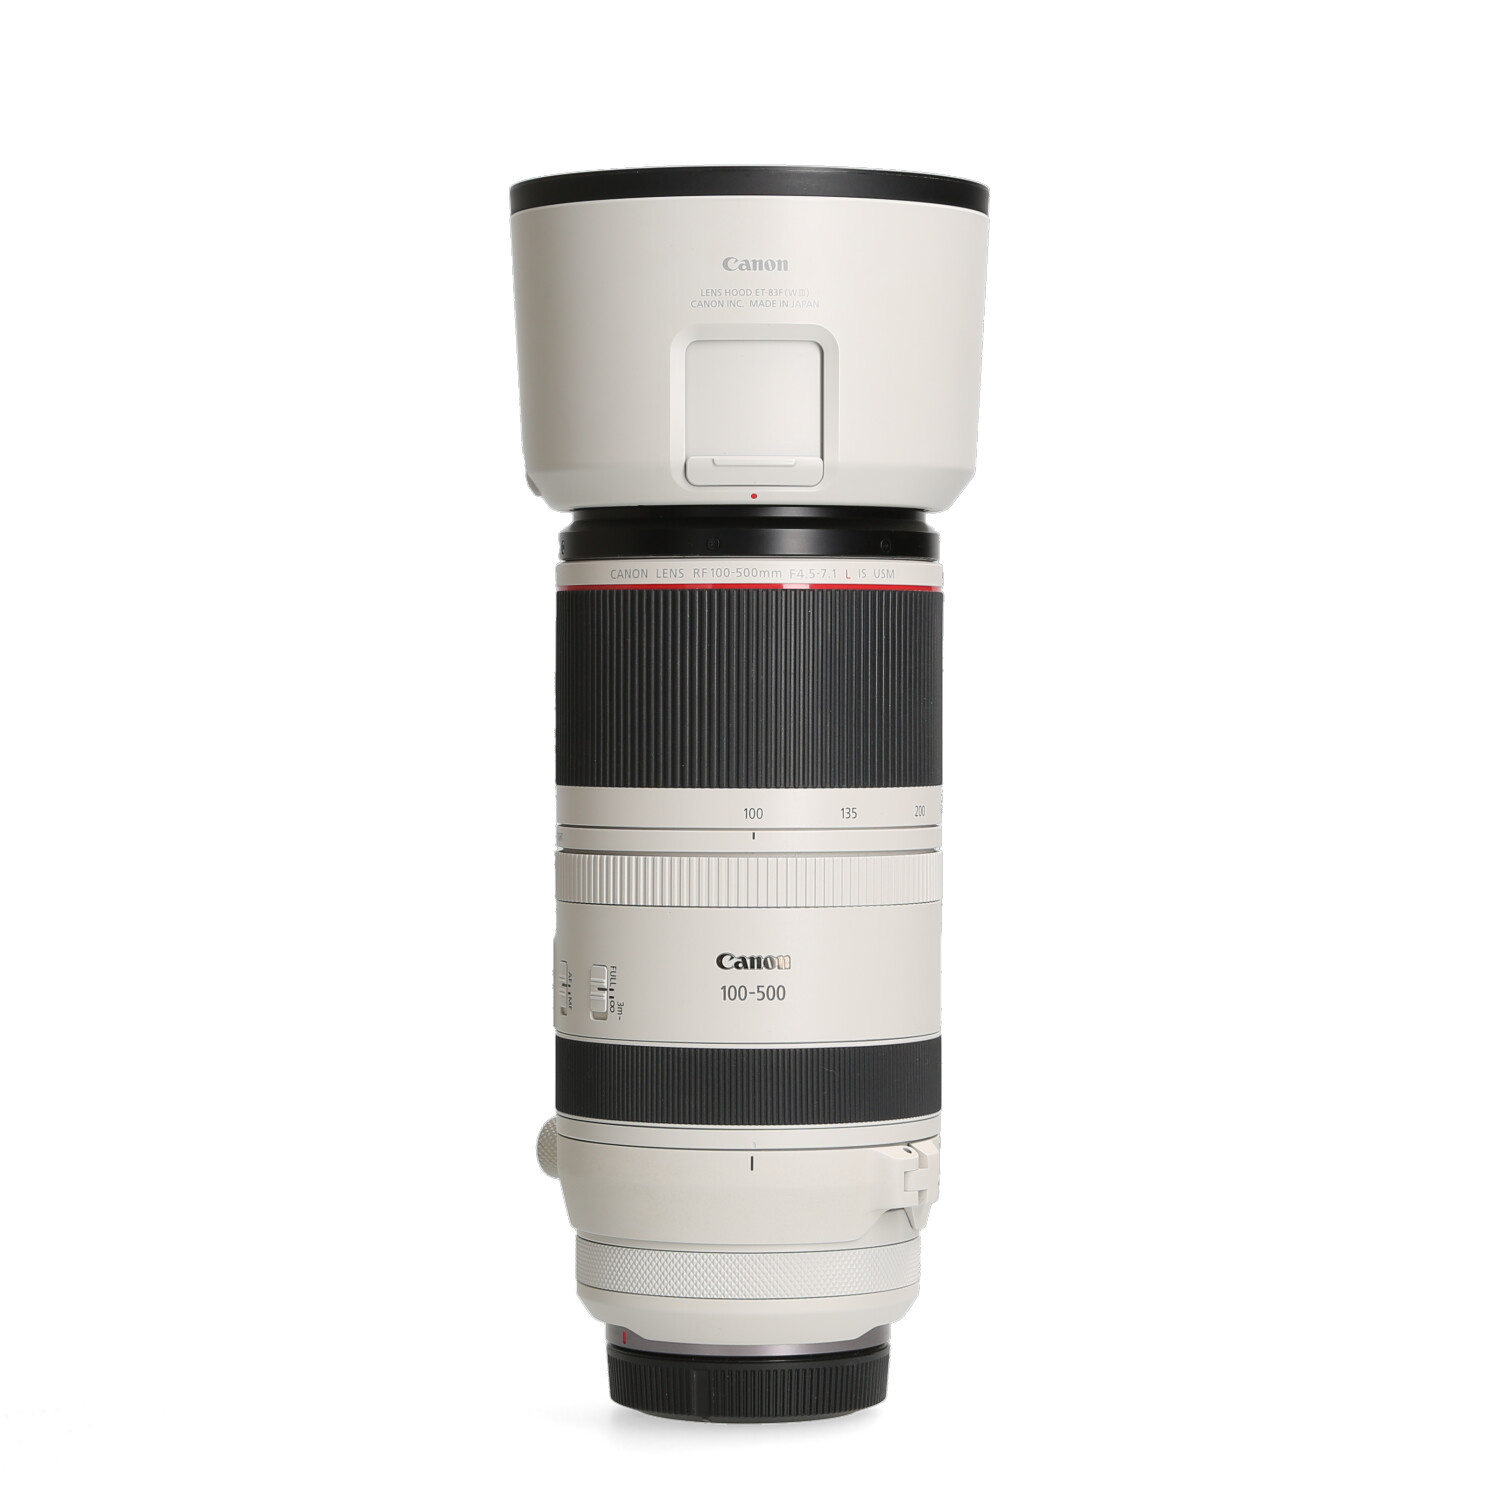 Canon Canon RF 100-500mm 4.5-7.1 L IS USM